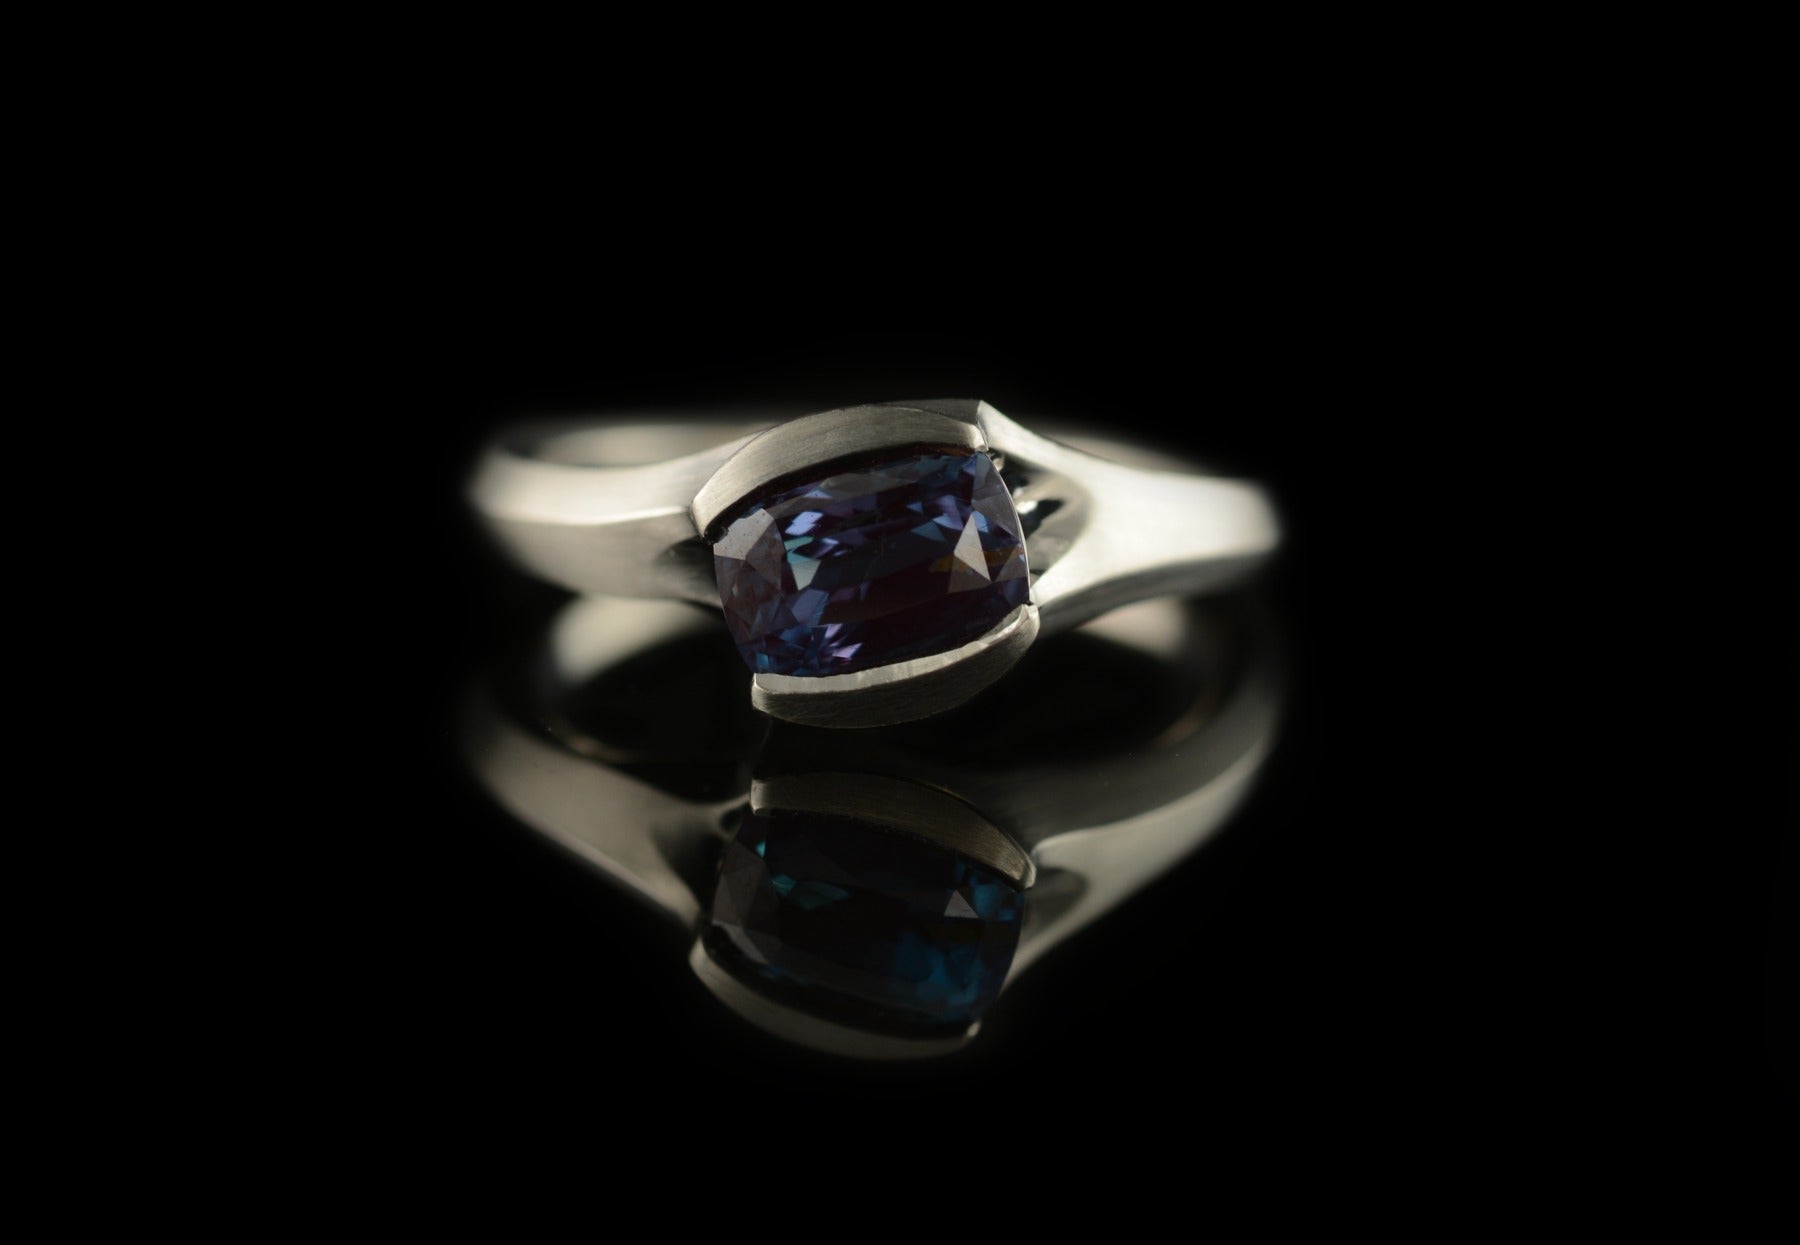 Carved platinum engagement ring with colour change alexandrite stone